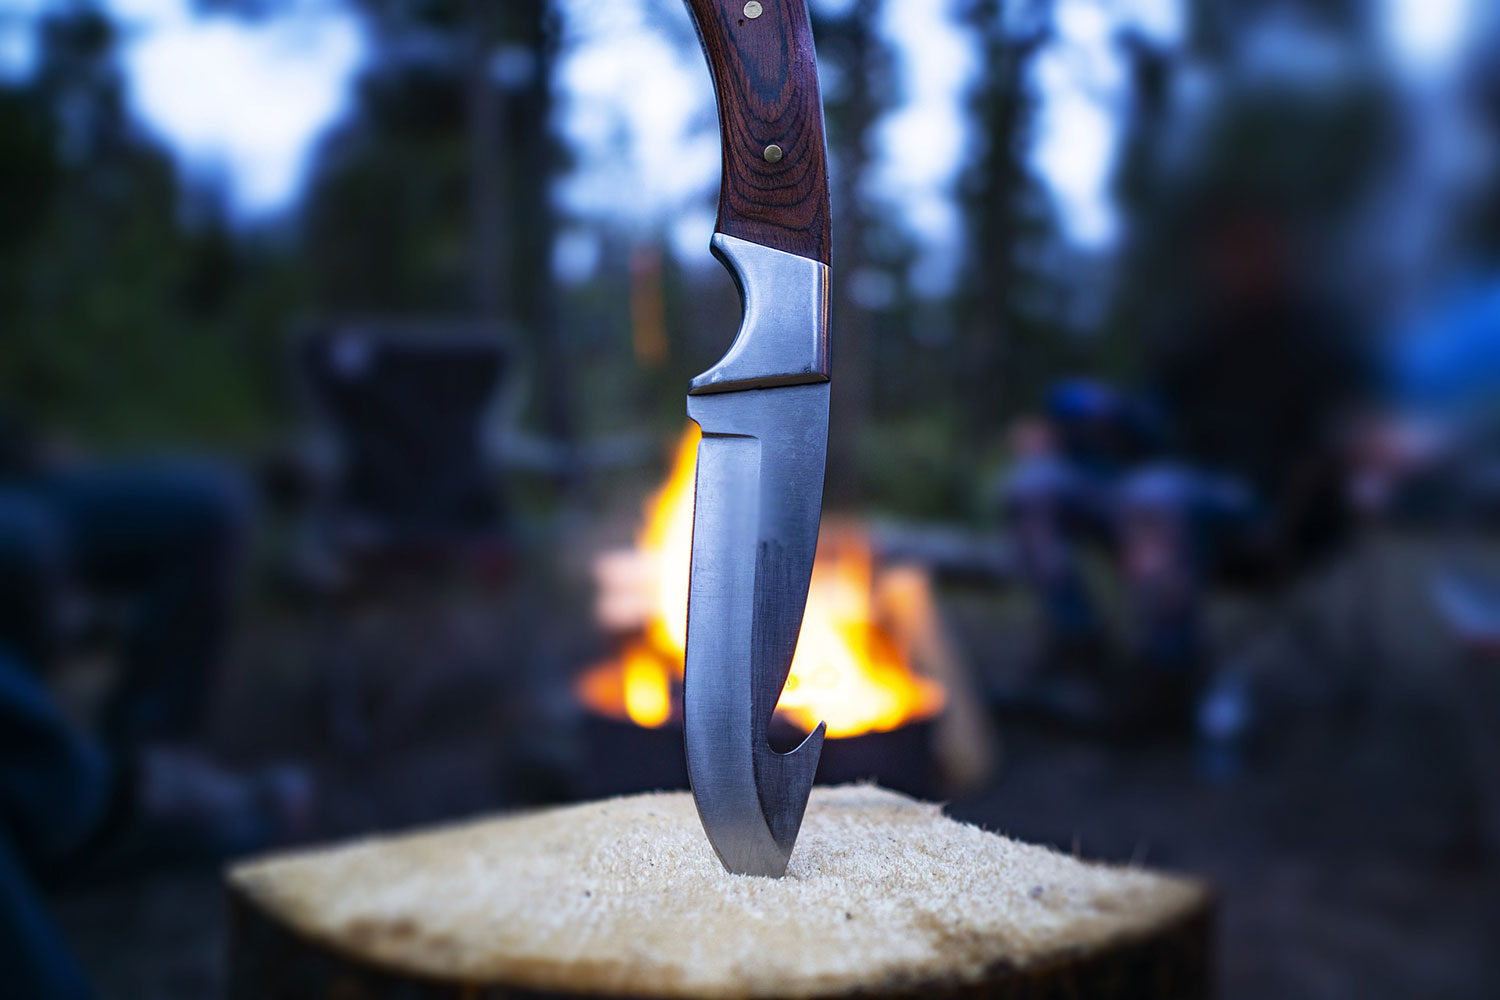 https://www.themanual.com/wp-content/uploads/sites/9/2021/12/best-hunting-knives.jpg?fit=800%2C800&p=1